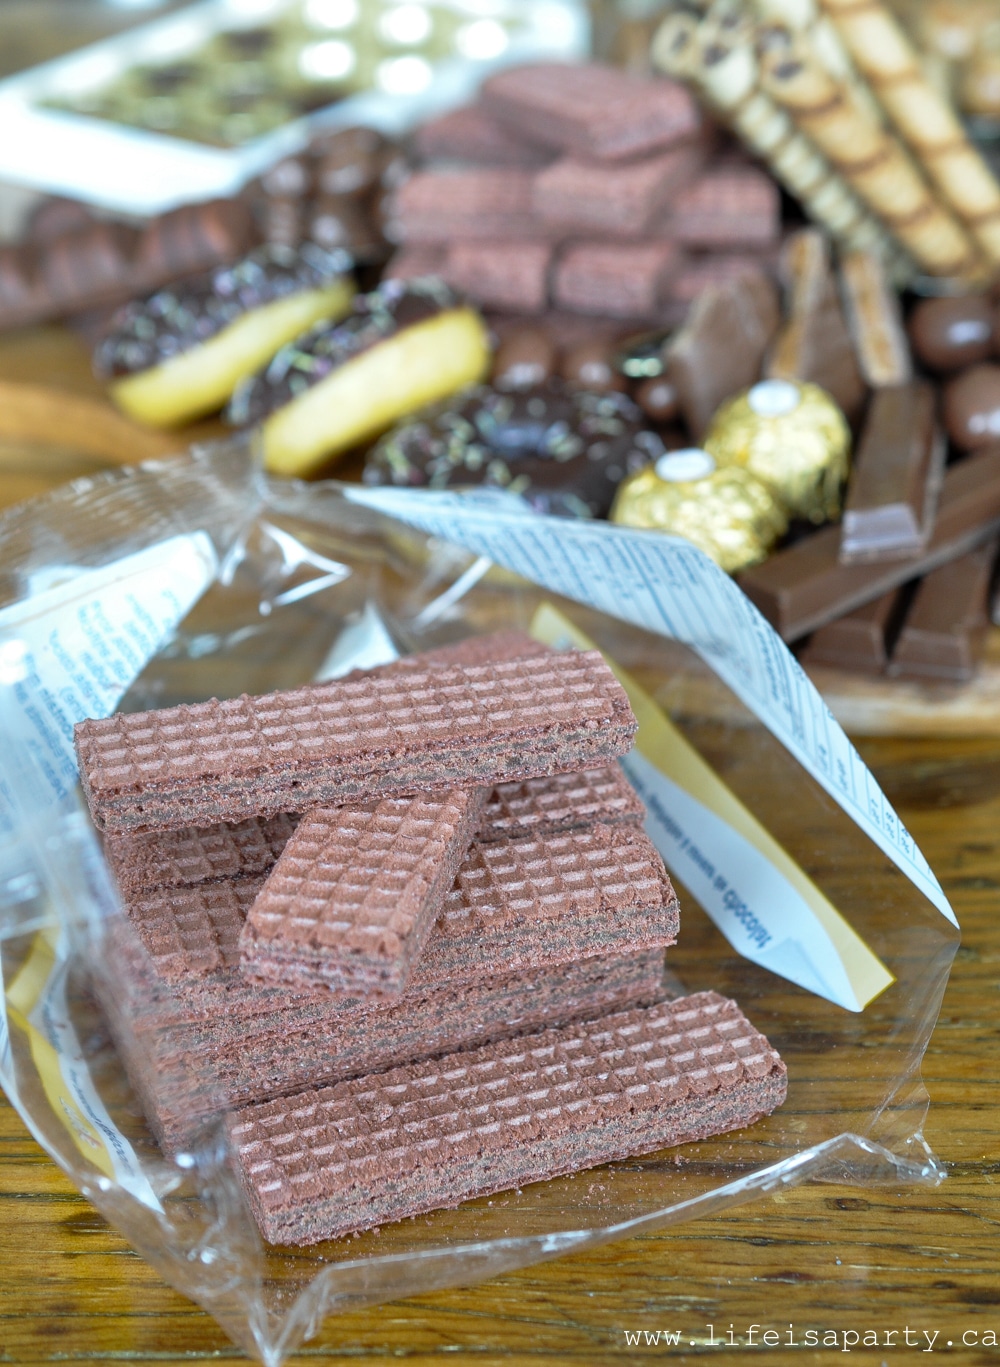 Chocolate wafer cookies